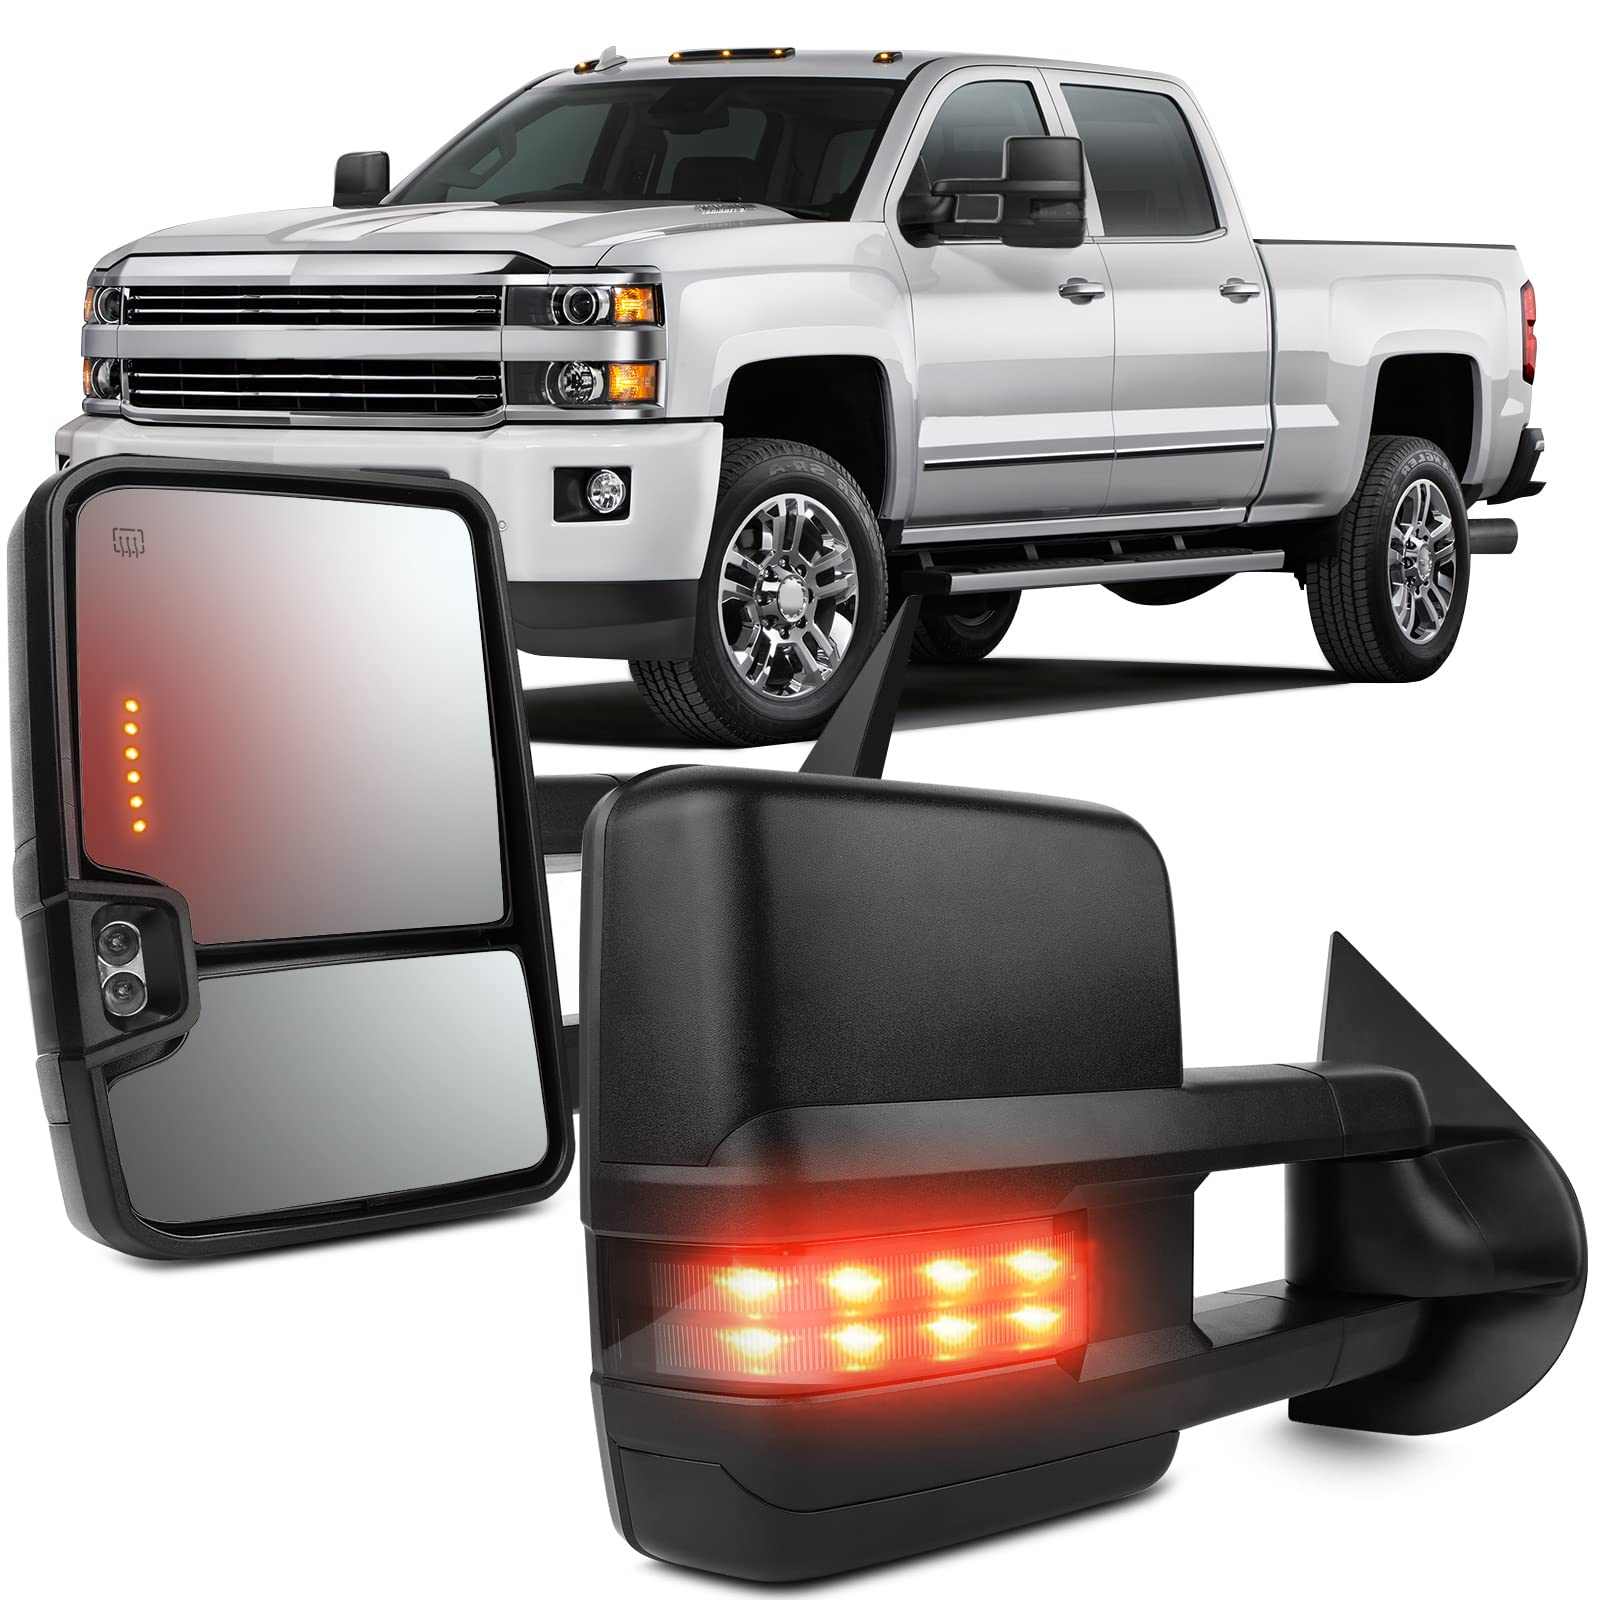 OCPTY Towing Mirrors with Power Heated Left and Right Side Tow Mirrors Compatible with 2003-2006 for Chevy Silverado/for GMC Sierra Pickup All Models Light Lens with LED Turn Signal Light with Black